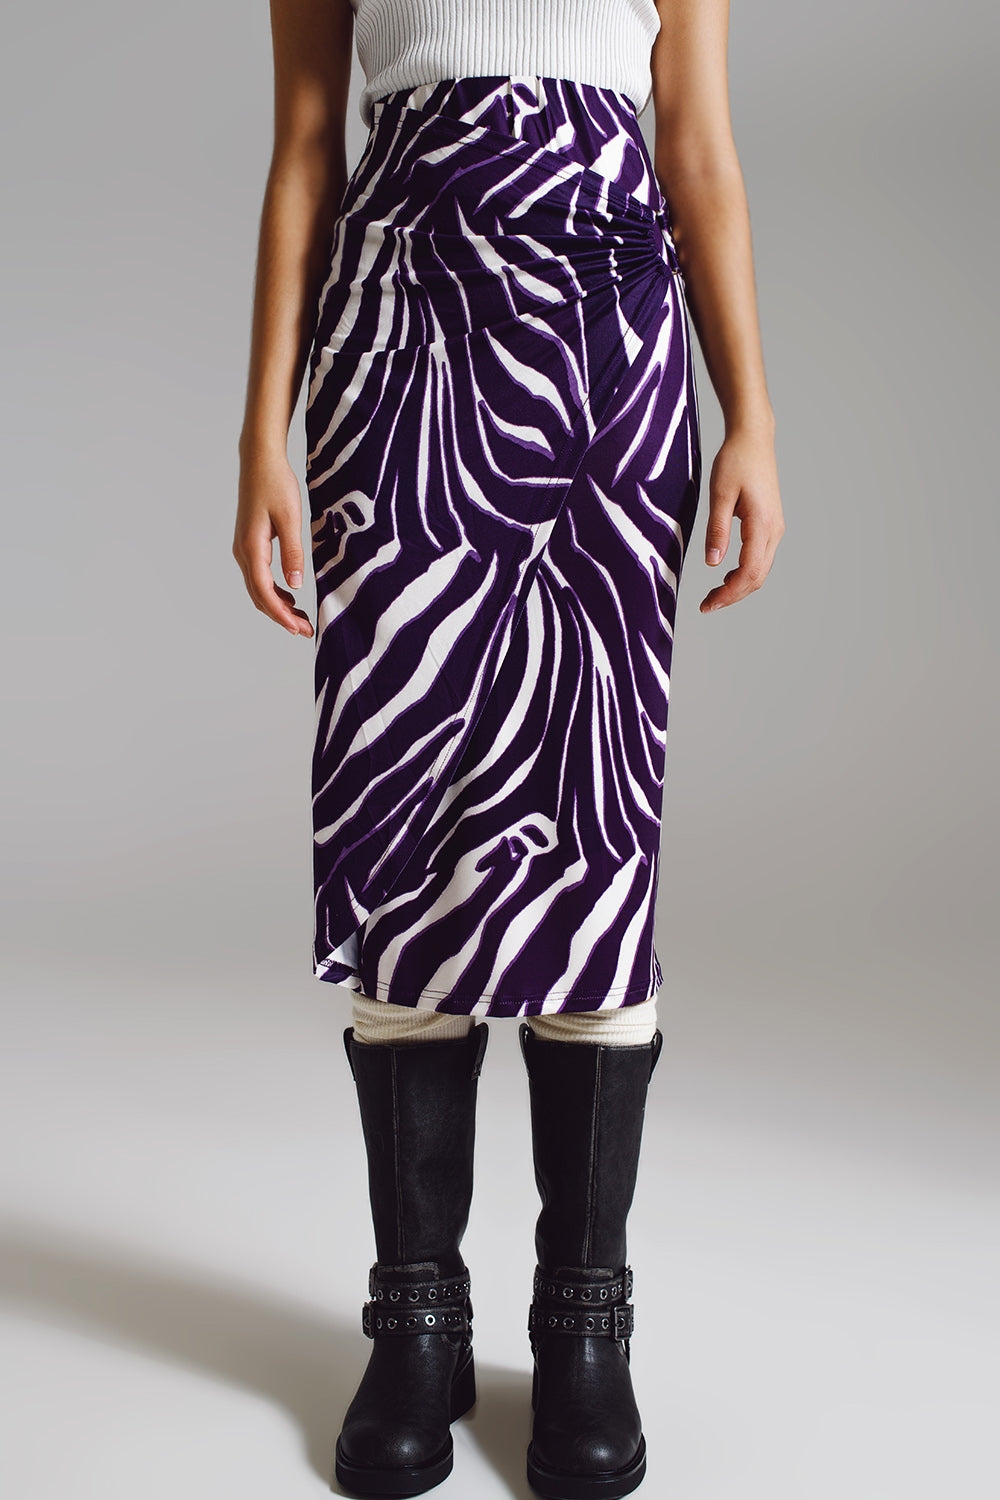 Wrap skirt with gathered detail at the side in Purple and Cream Zebra Print